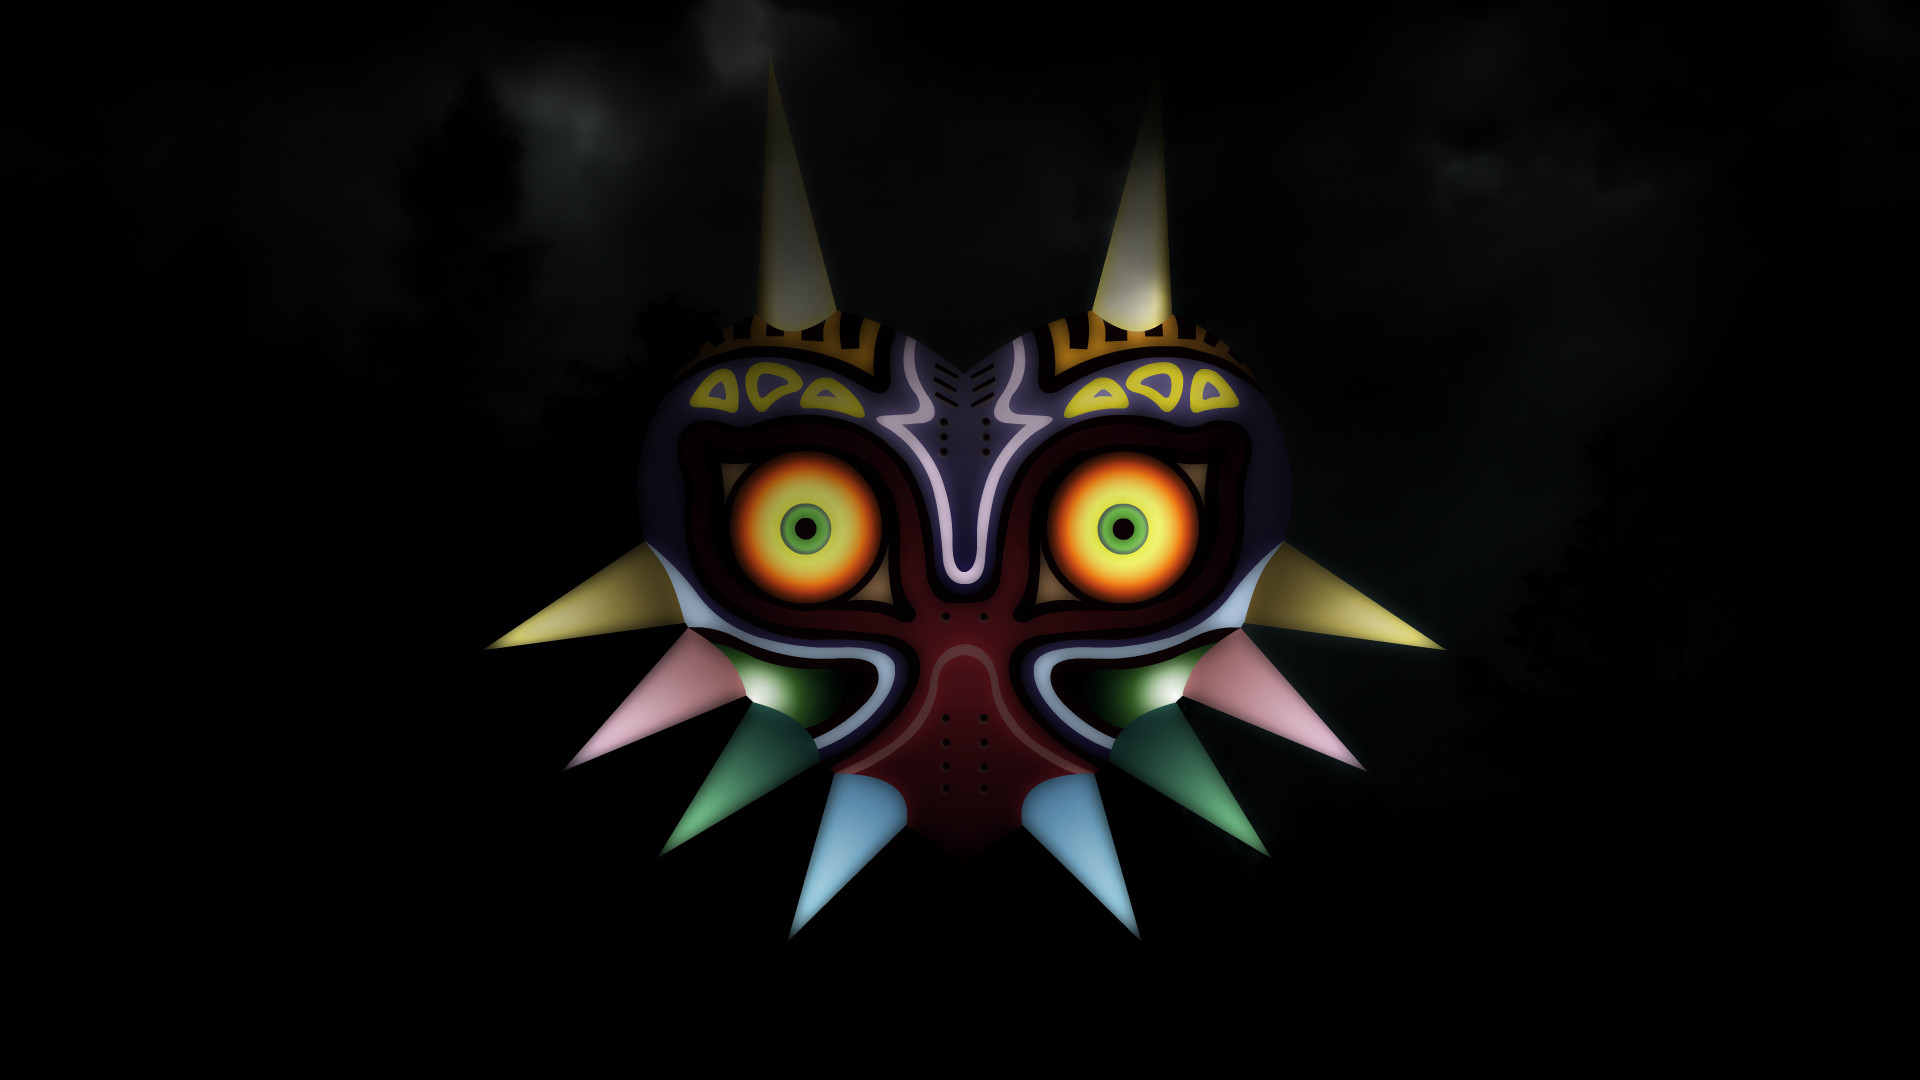 Majoras Mask – From out of the smoke by Nolan989890